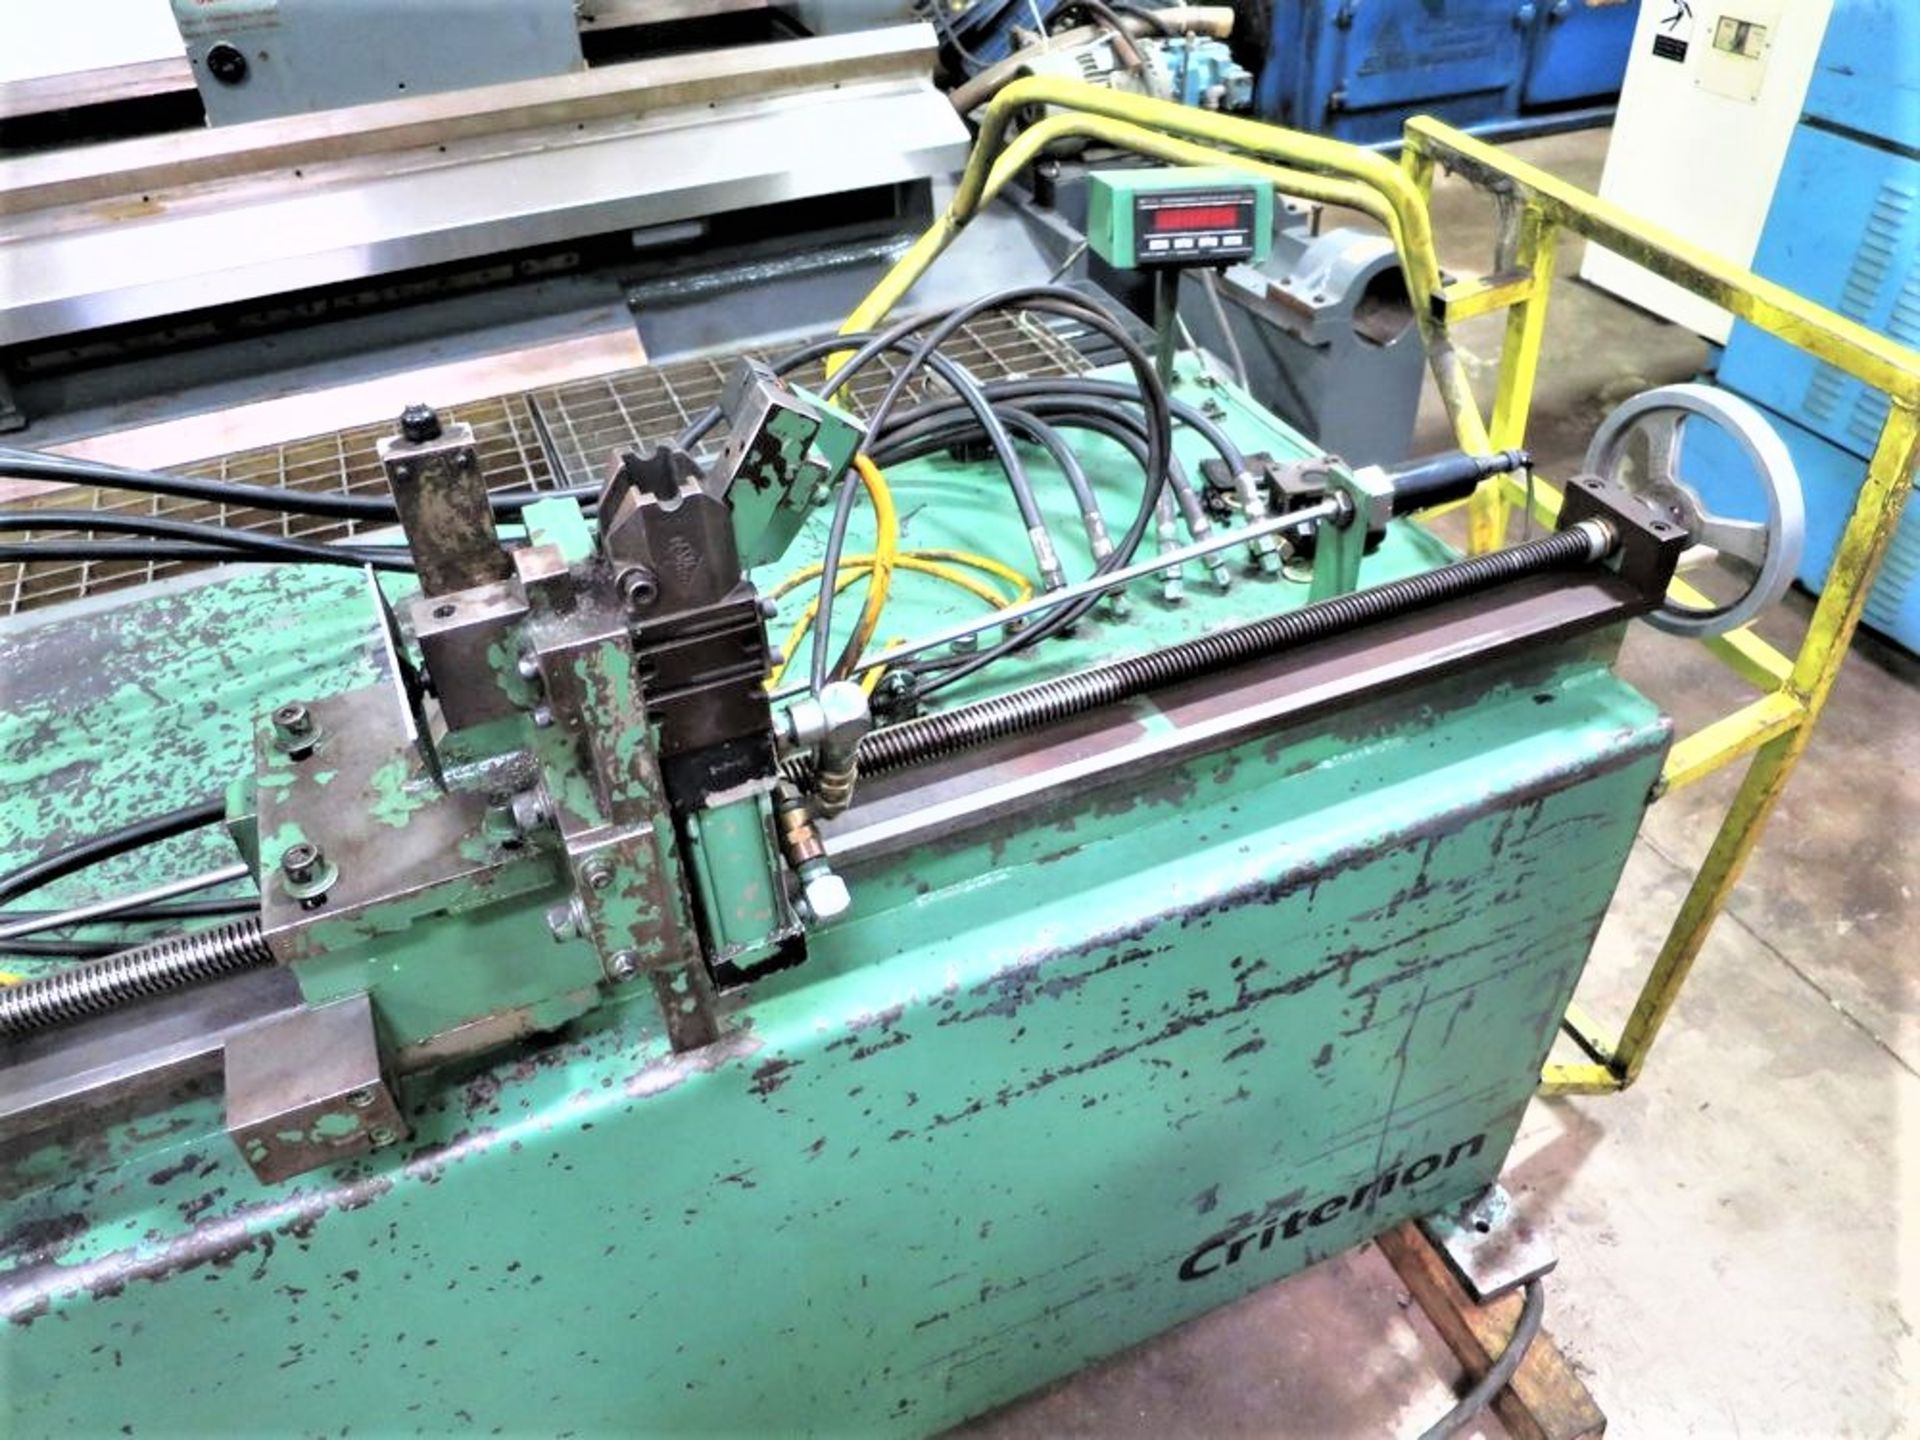 Criterion Mdl 125-T-0 (26,000) Twin Head Hydraulic Bender - Image 3 of 7